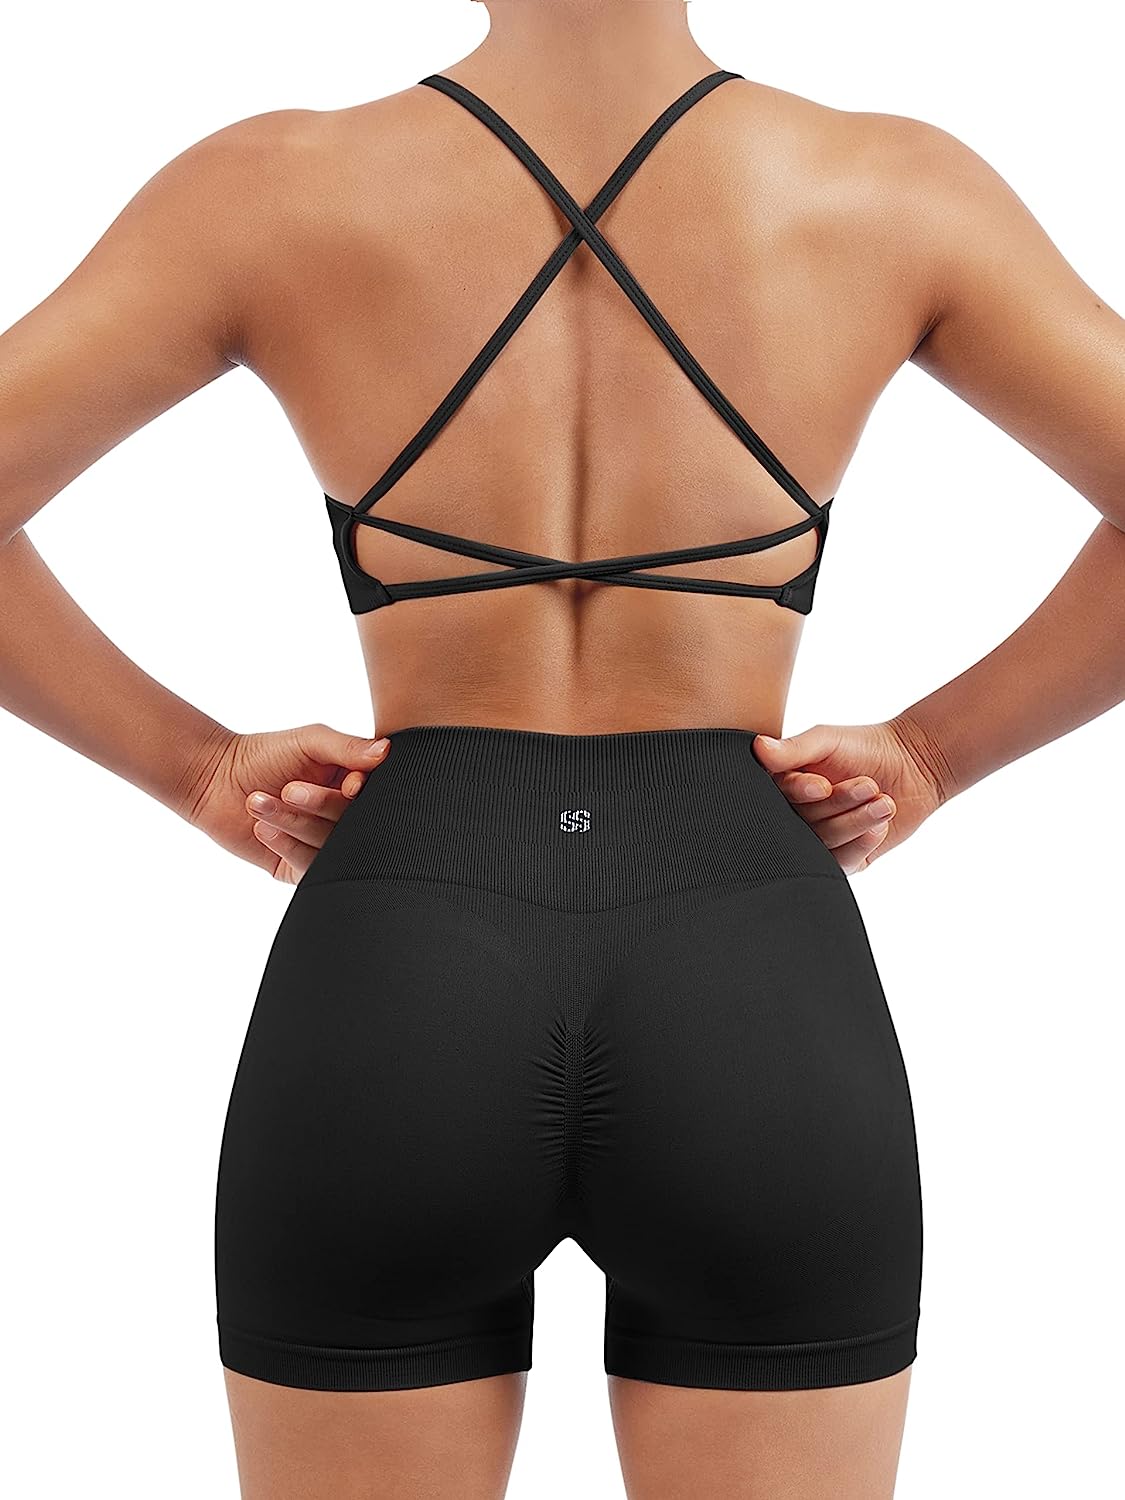 2 Piece Workout Sets For Women WholeSale - Price List, Bulk Buy at